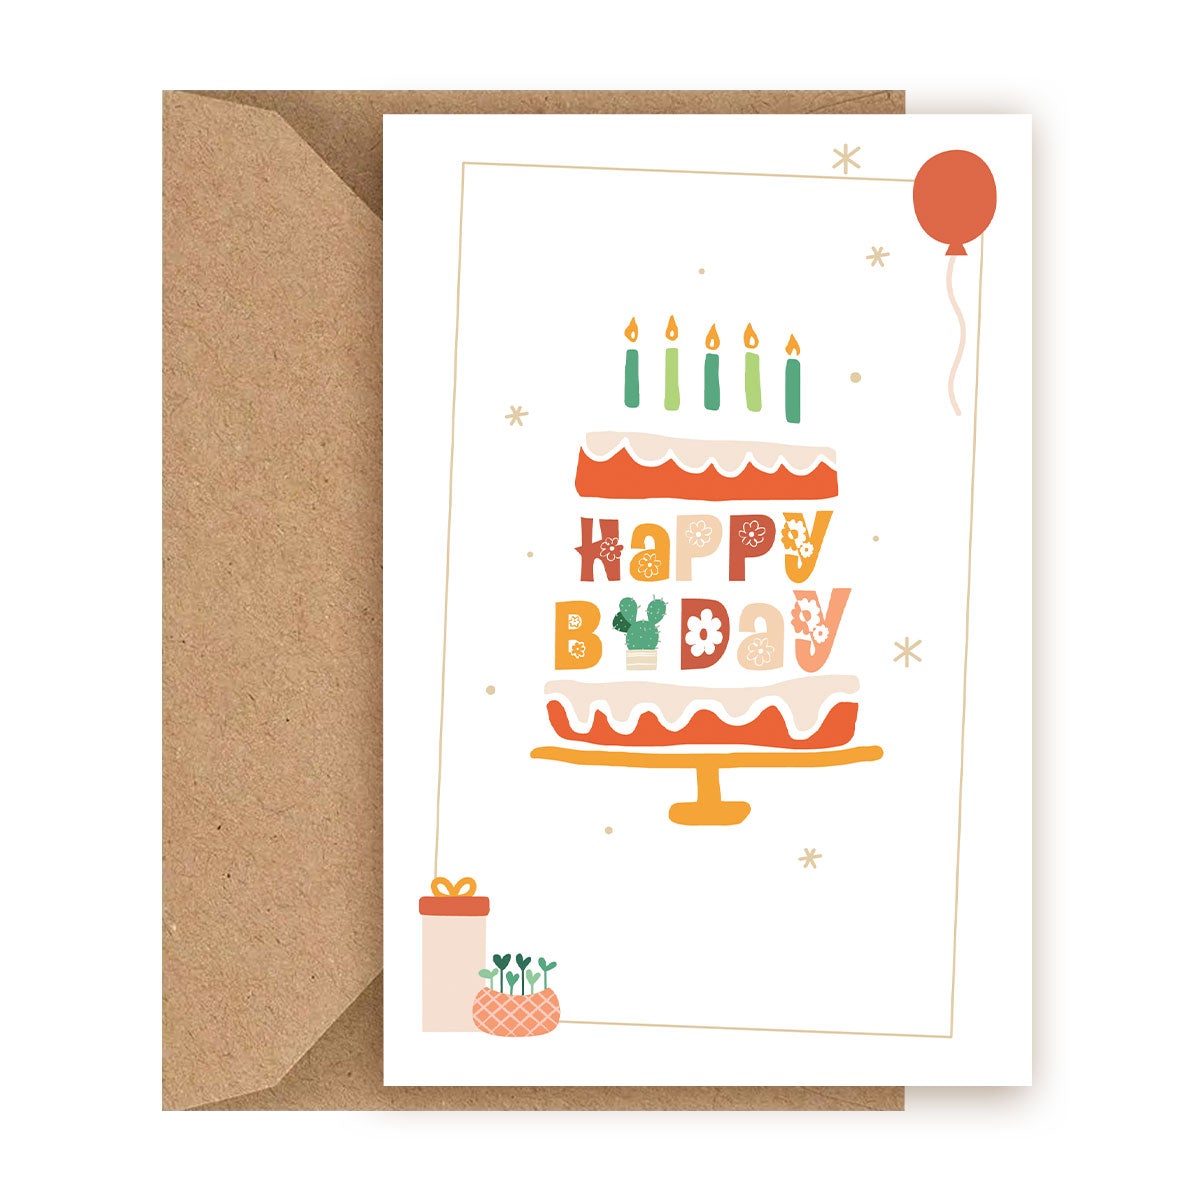 Happy Birthday Cake Card for sale, Succulent Happy Birthday Card for sale, Cactus Birthday Greeting Card, Succulents Greeting Card, Succulents Gift Ideas